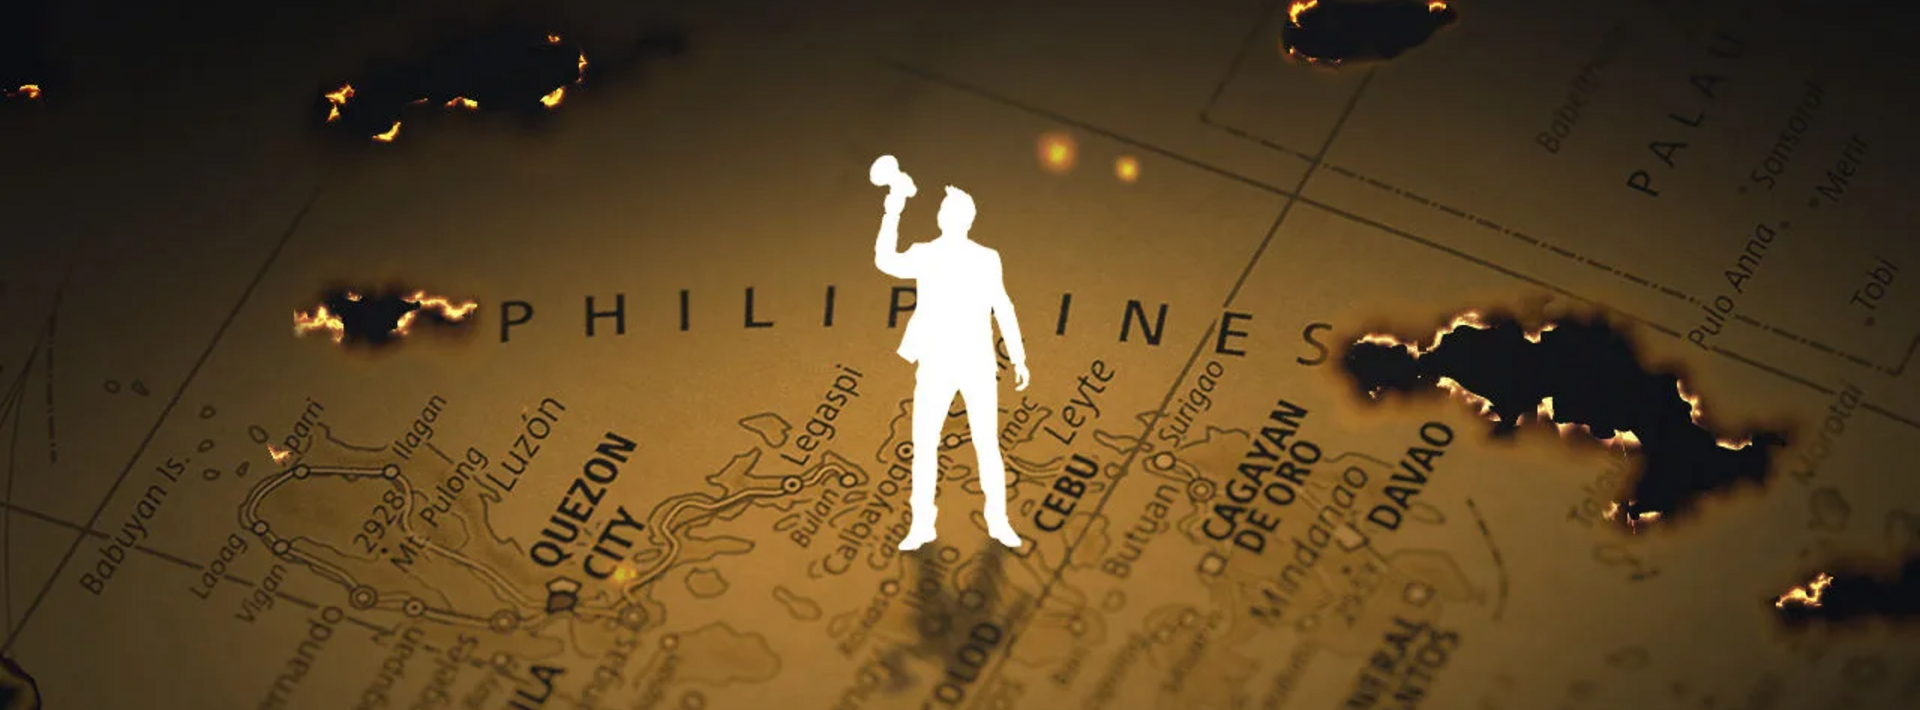 silhouette against map of Philippines